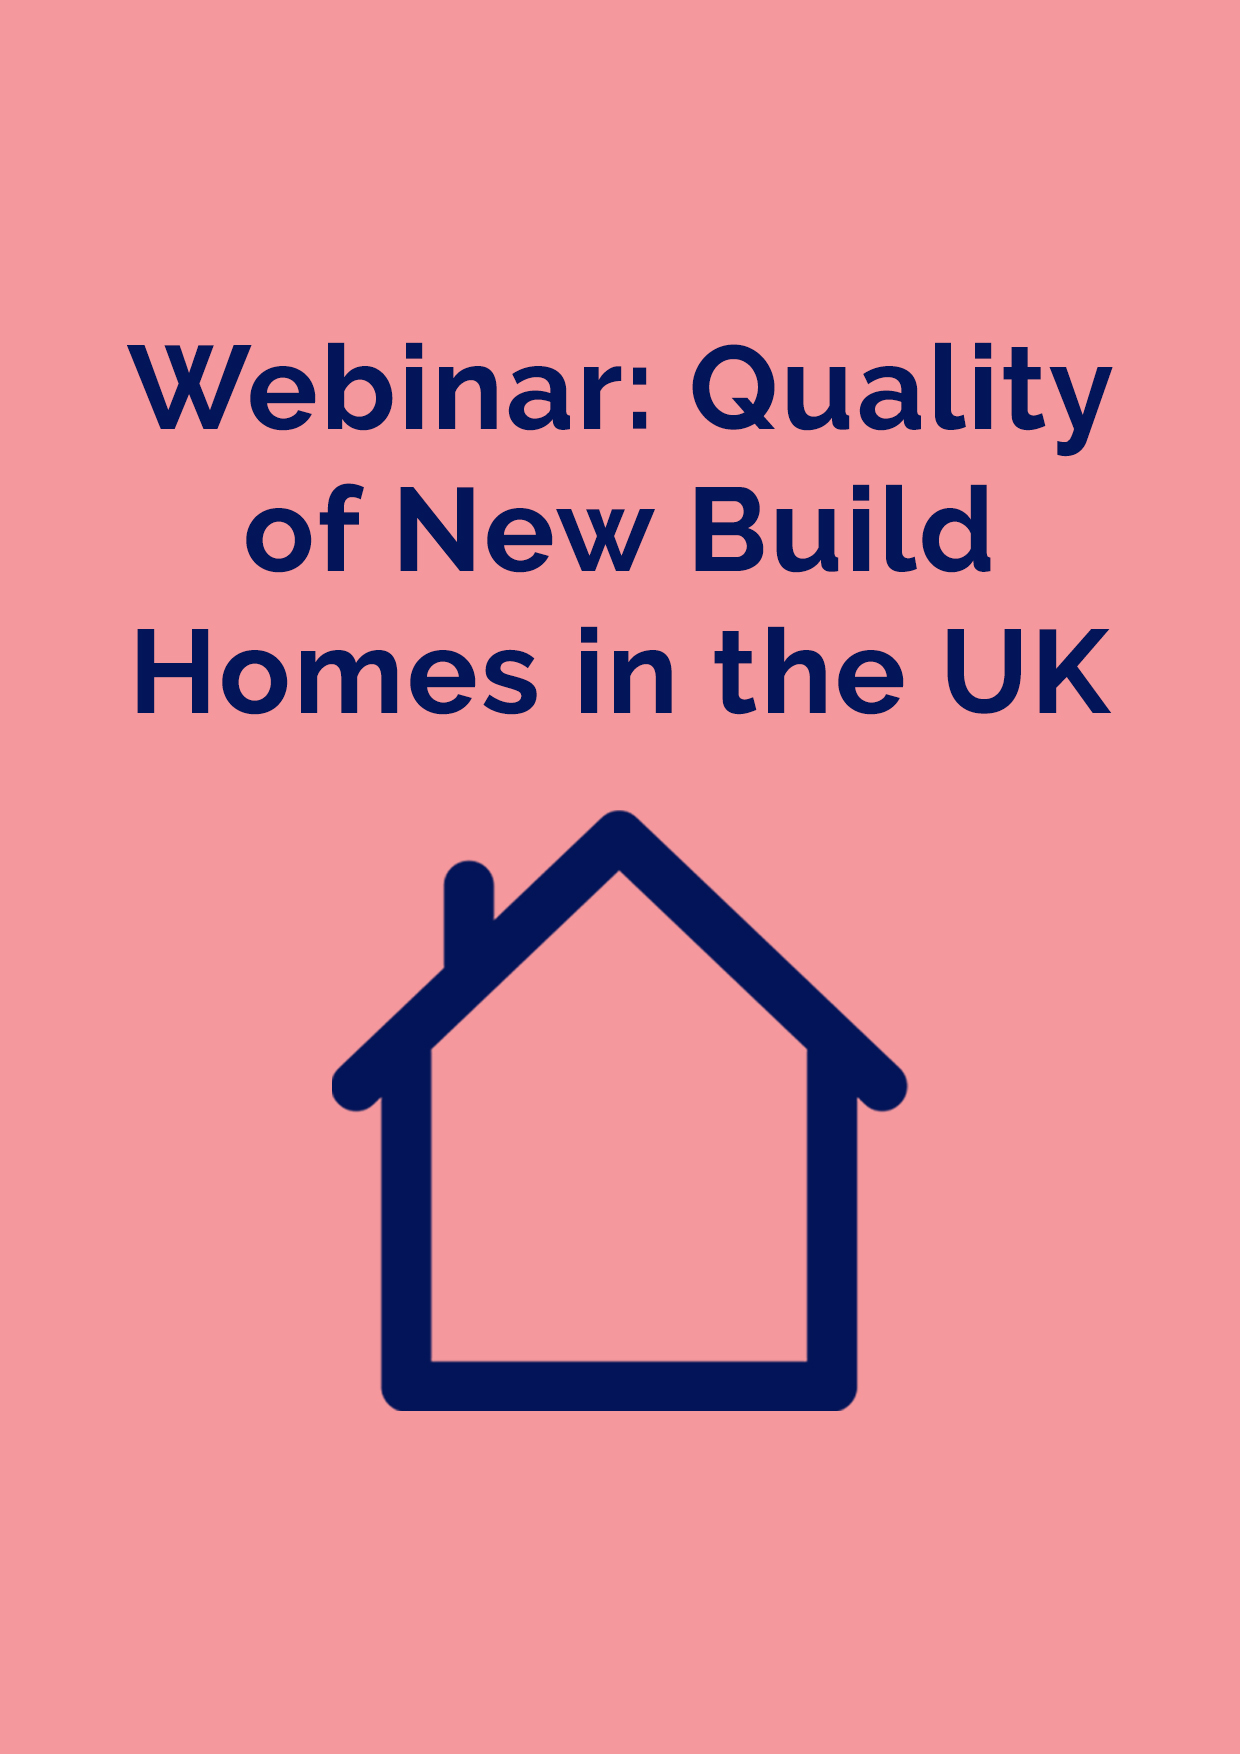 Webinar: Quality of New Build Homes in the UK